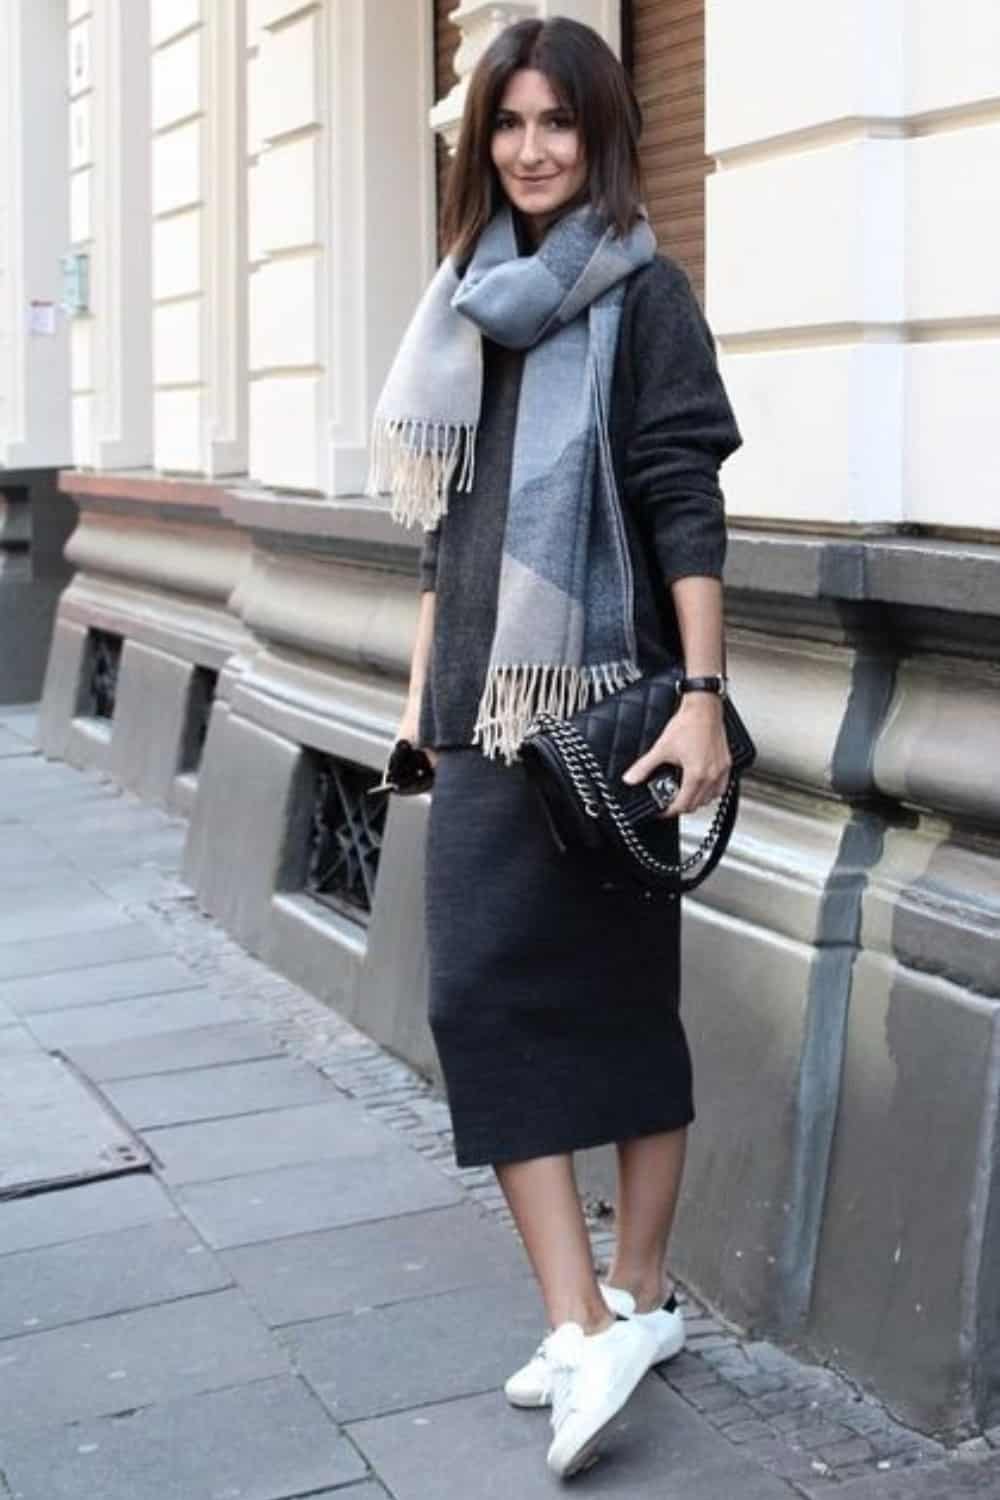 Accessorize a black dress with wool scarf